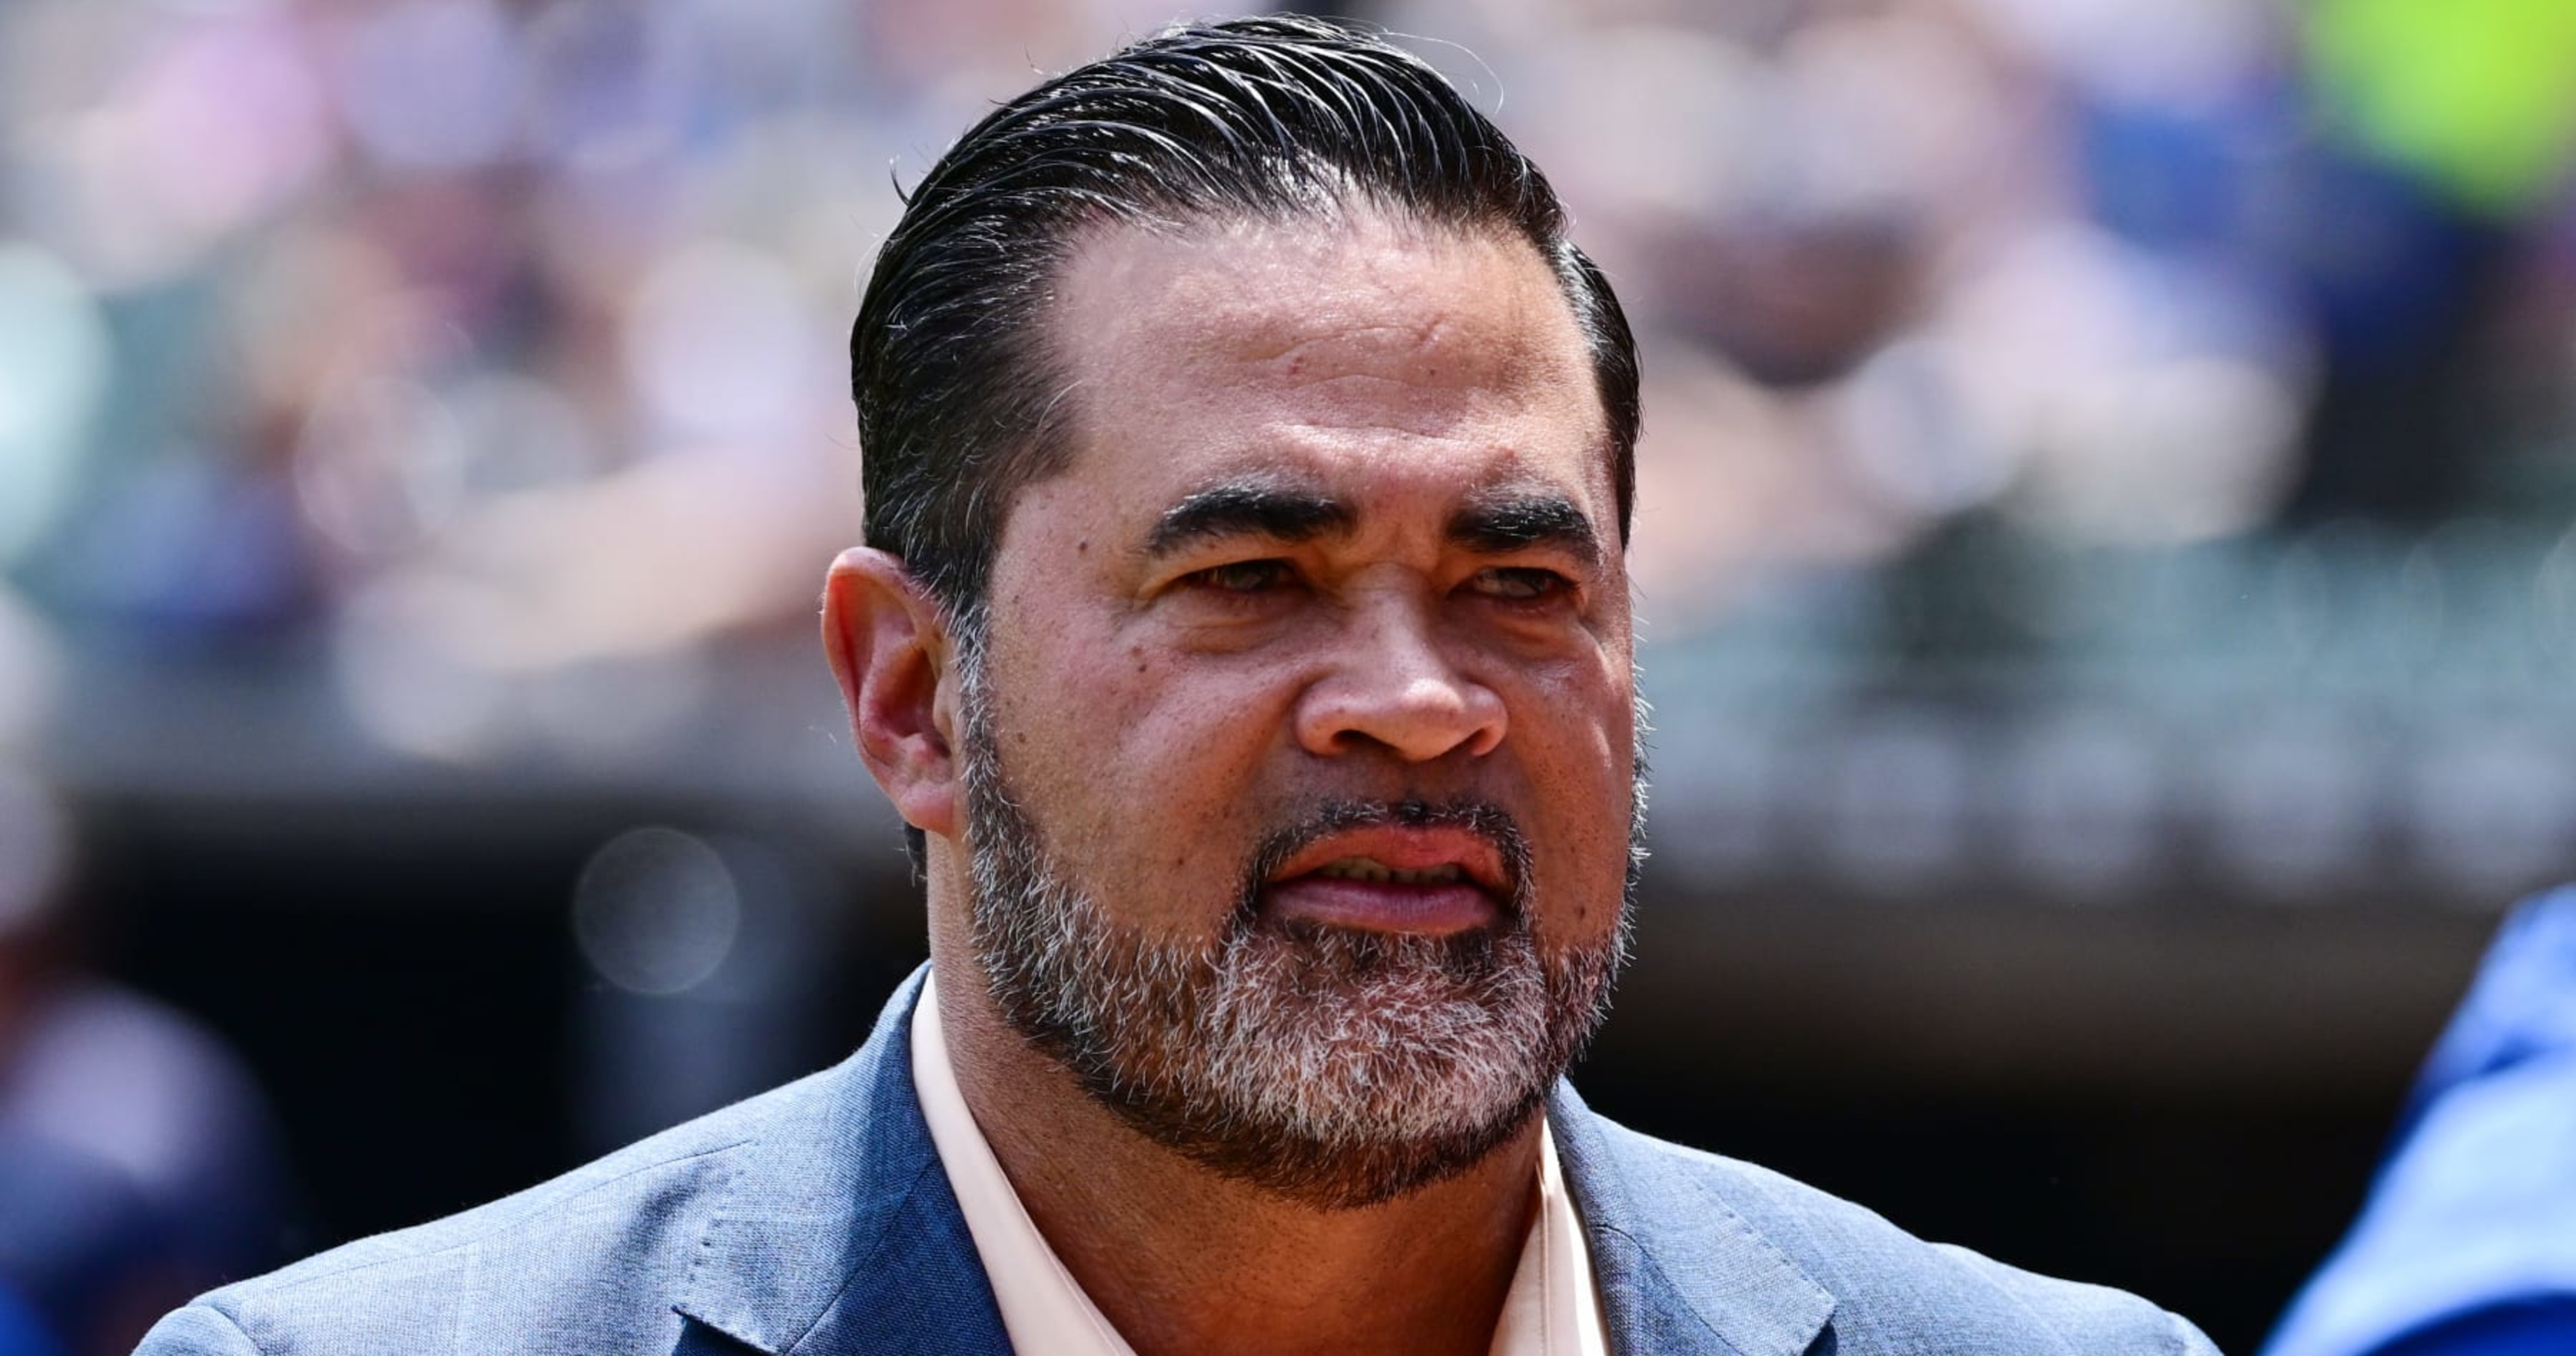 MLB Rumors: Ozzie Guillén to Interview for White Sox Managerial Job